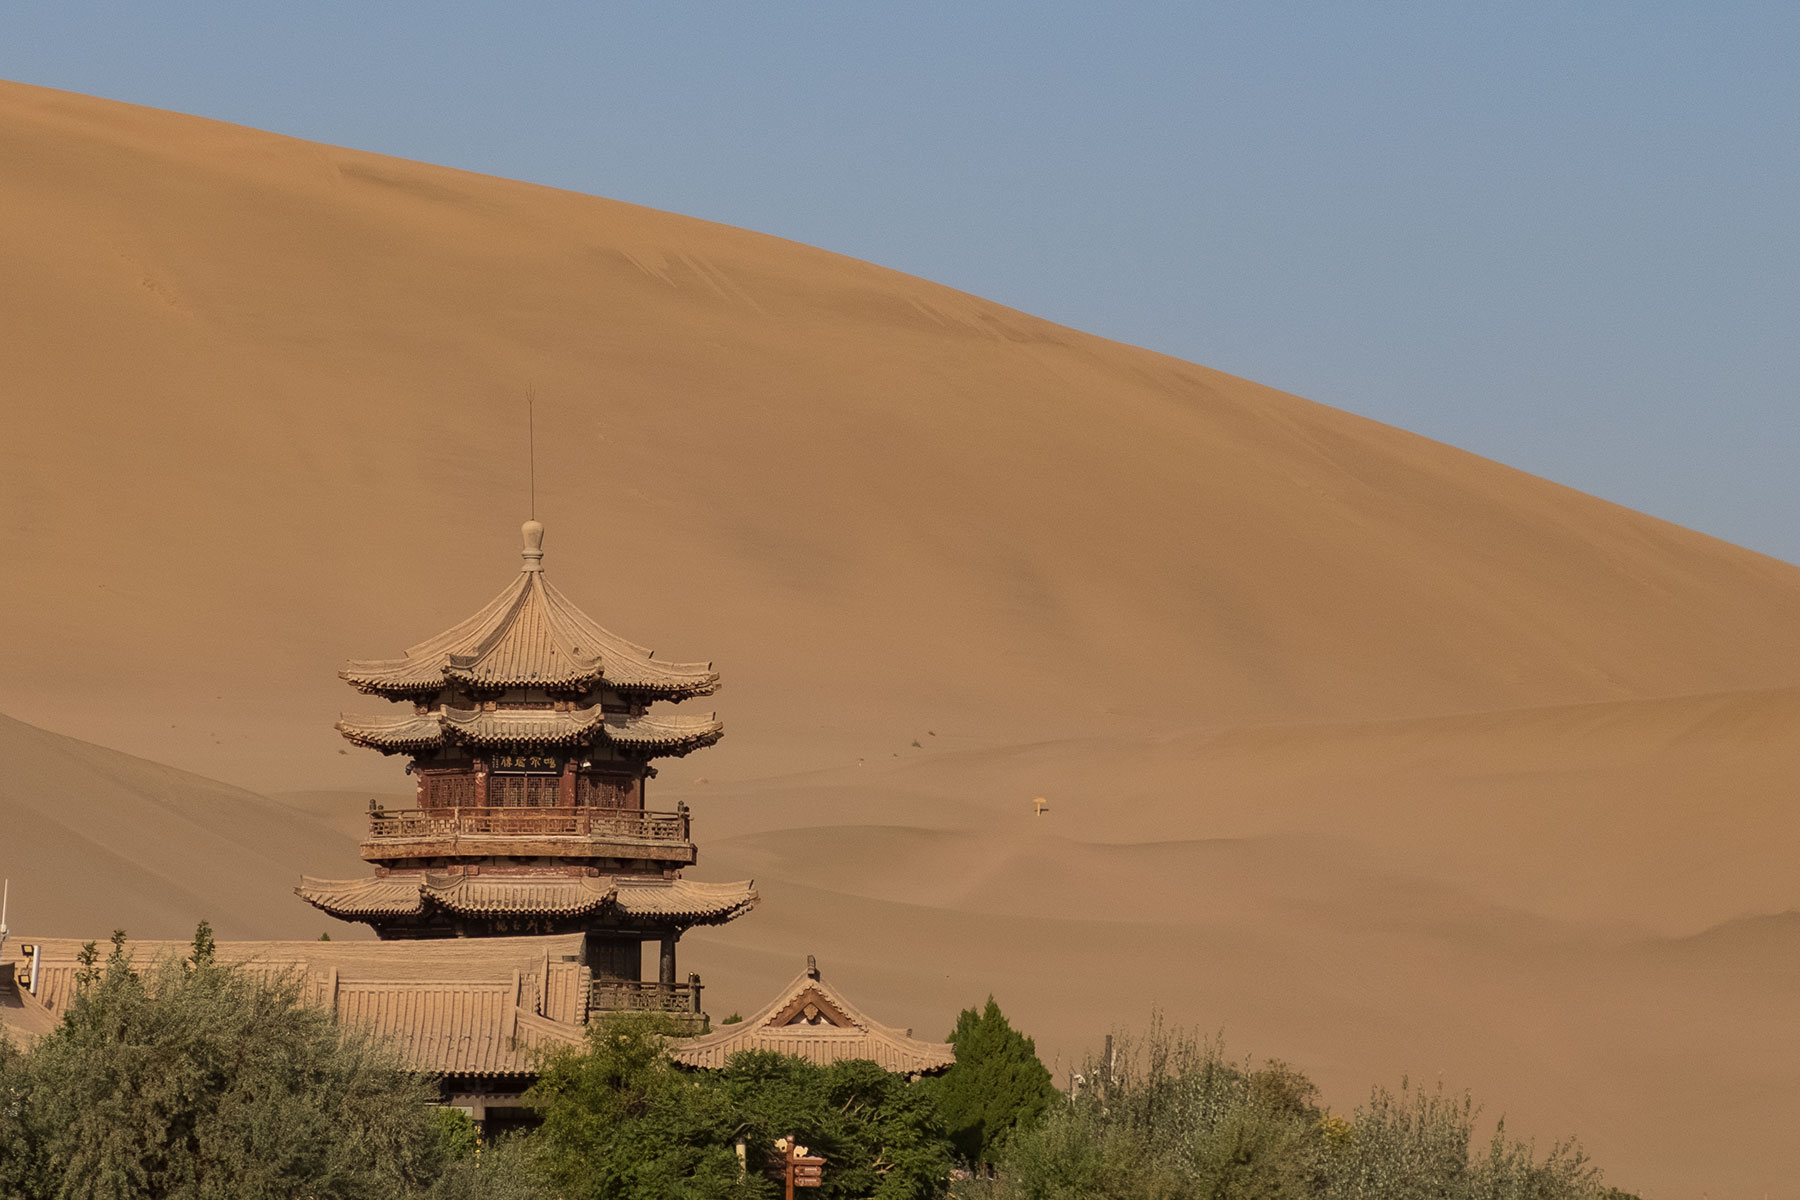 Mingsha Wüste in Dunhuang in China